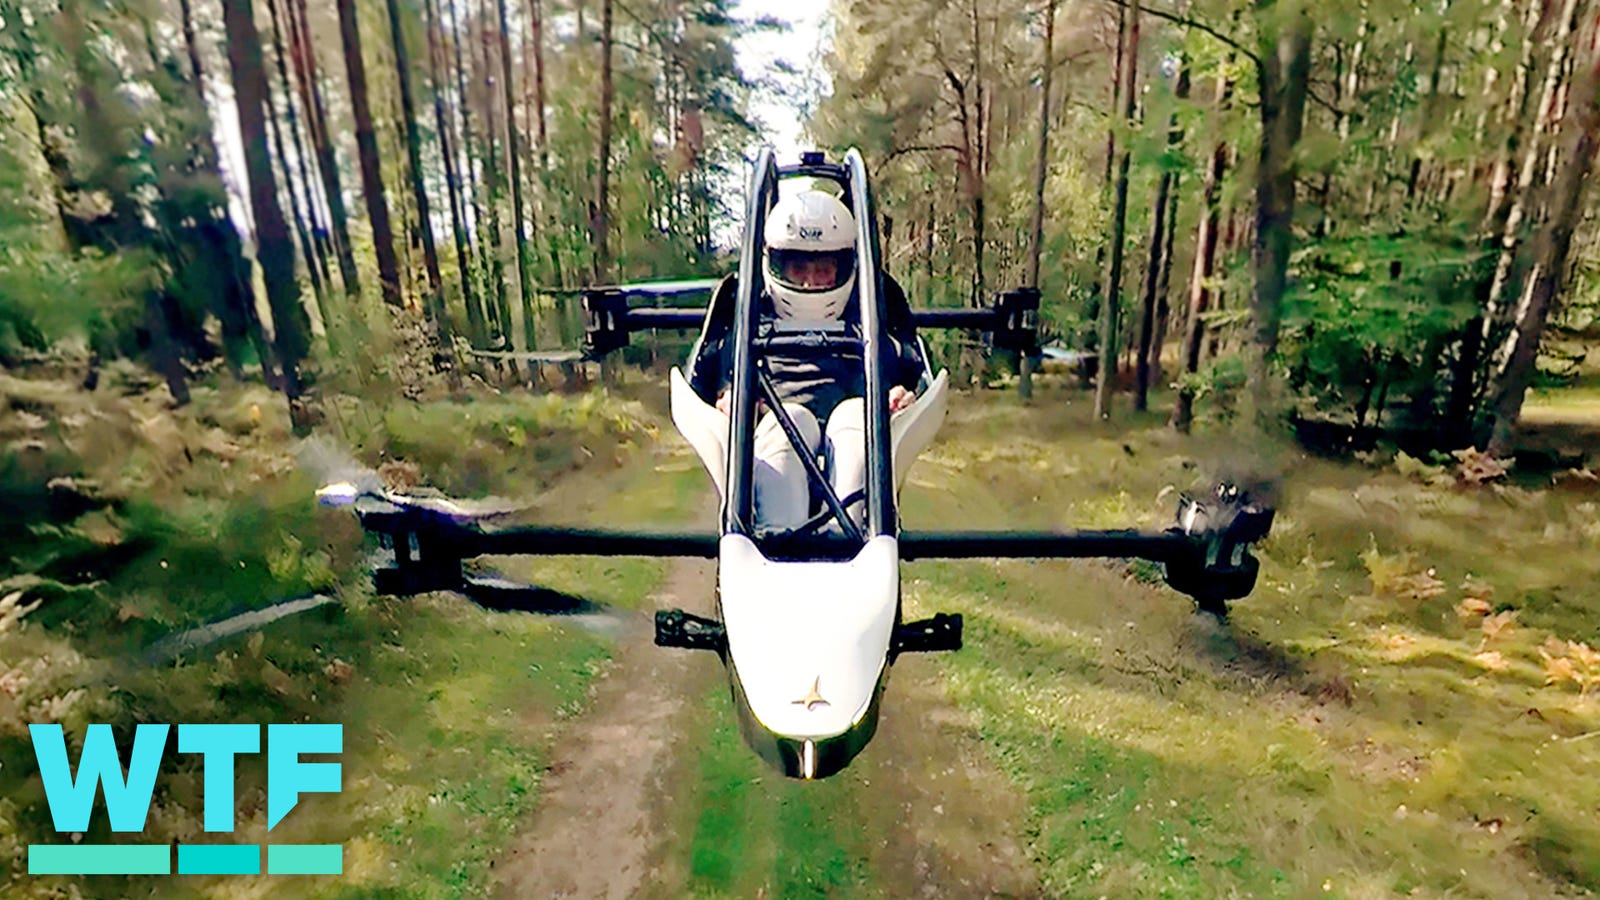 You can order the Jetson One personal flying vehicle right now